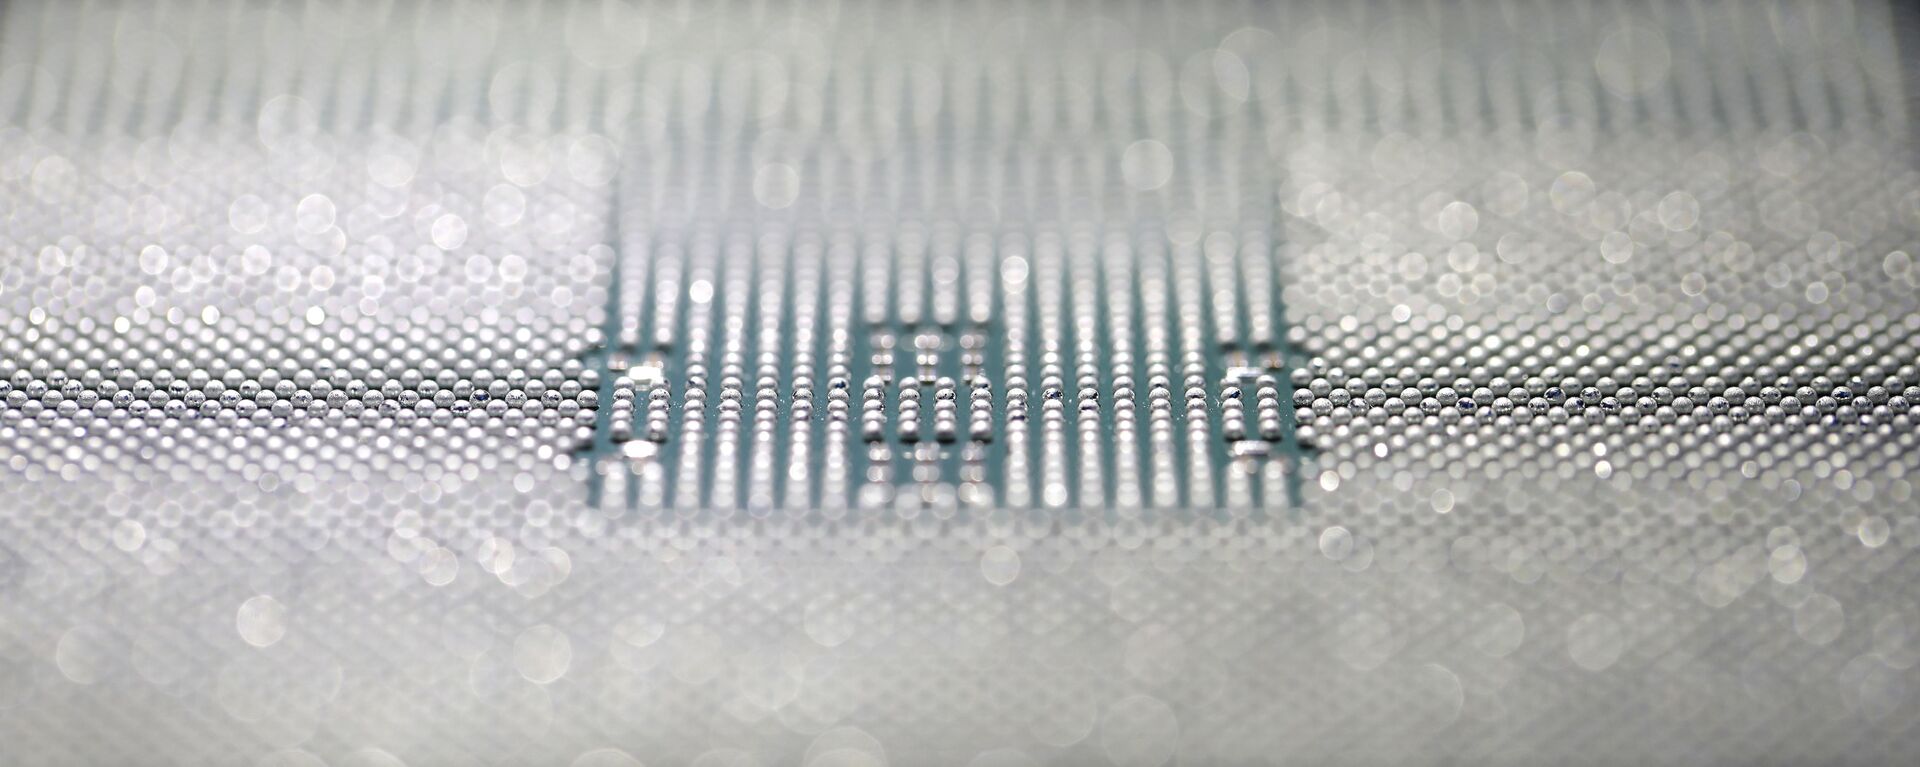 A Kunpeng 920 chip is displayed during an unveiling ceremony in Shenzhen, China, Monday, Jan. 7, 2019. Chinese telecom giant Huawei unveiled a processor chip for data centers and cloud computing as it expands into an emerging global market despite Western warnings the company might be a security risk.  - Sputnik International, 1920, 27.09.2021